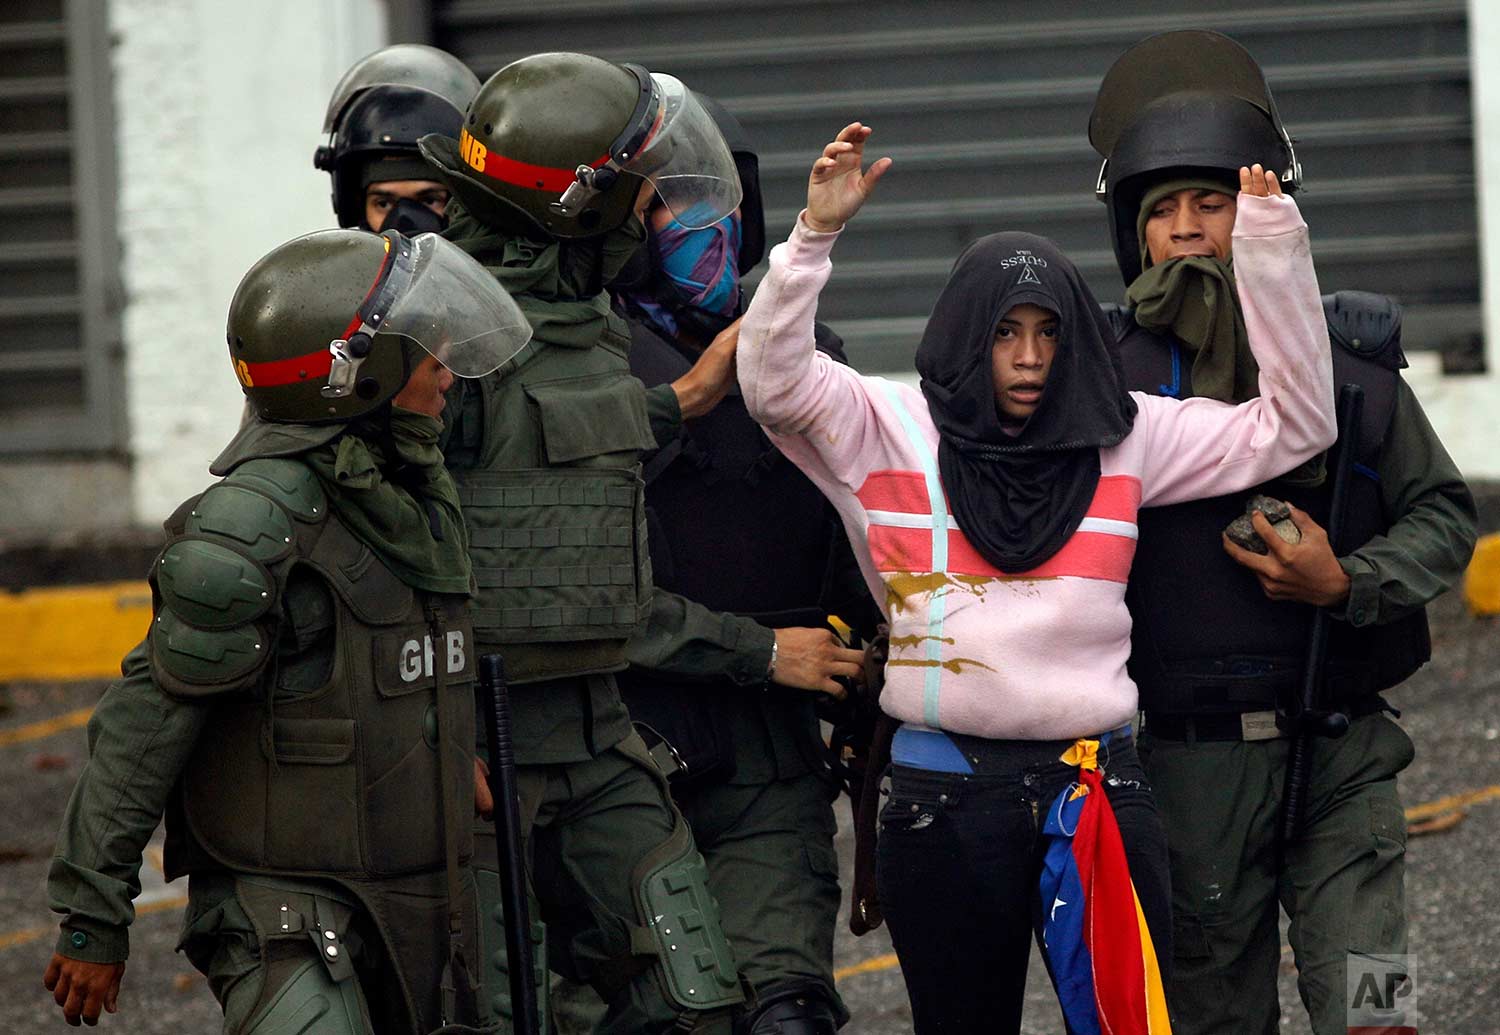 Bolivarian National Guards detain an anti-government demonstrator during clashes in Caracas, Venezuela, Friday, July 28, 2017, two days before the vote to begin the rewriting of Venezuela's constitution. (AP Photo/Ariana Cubillos)